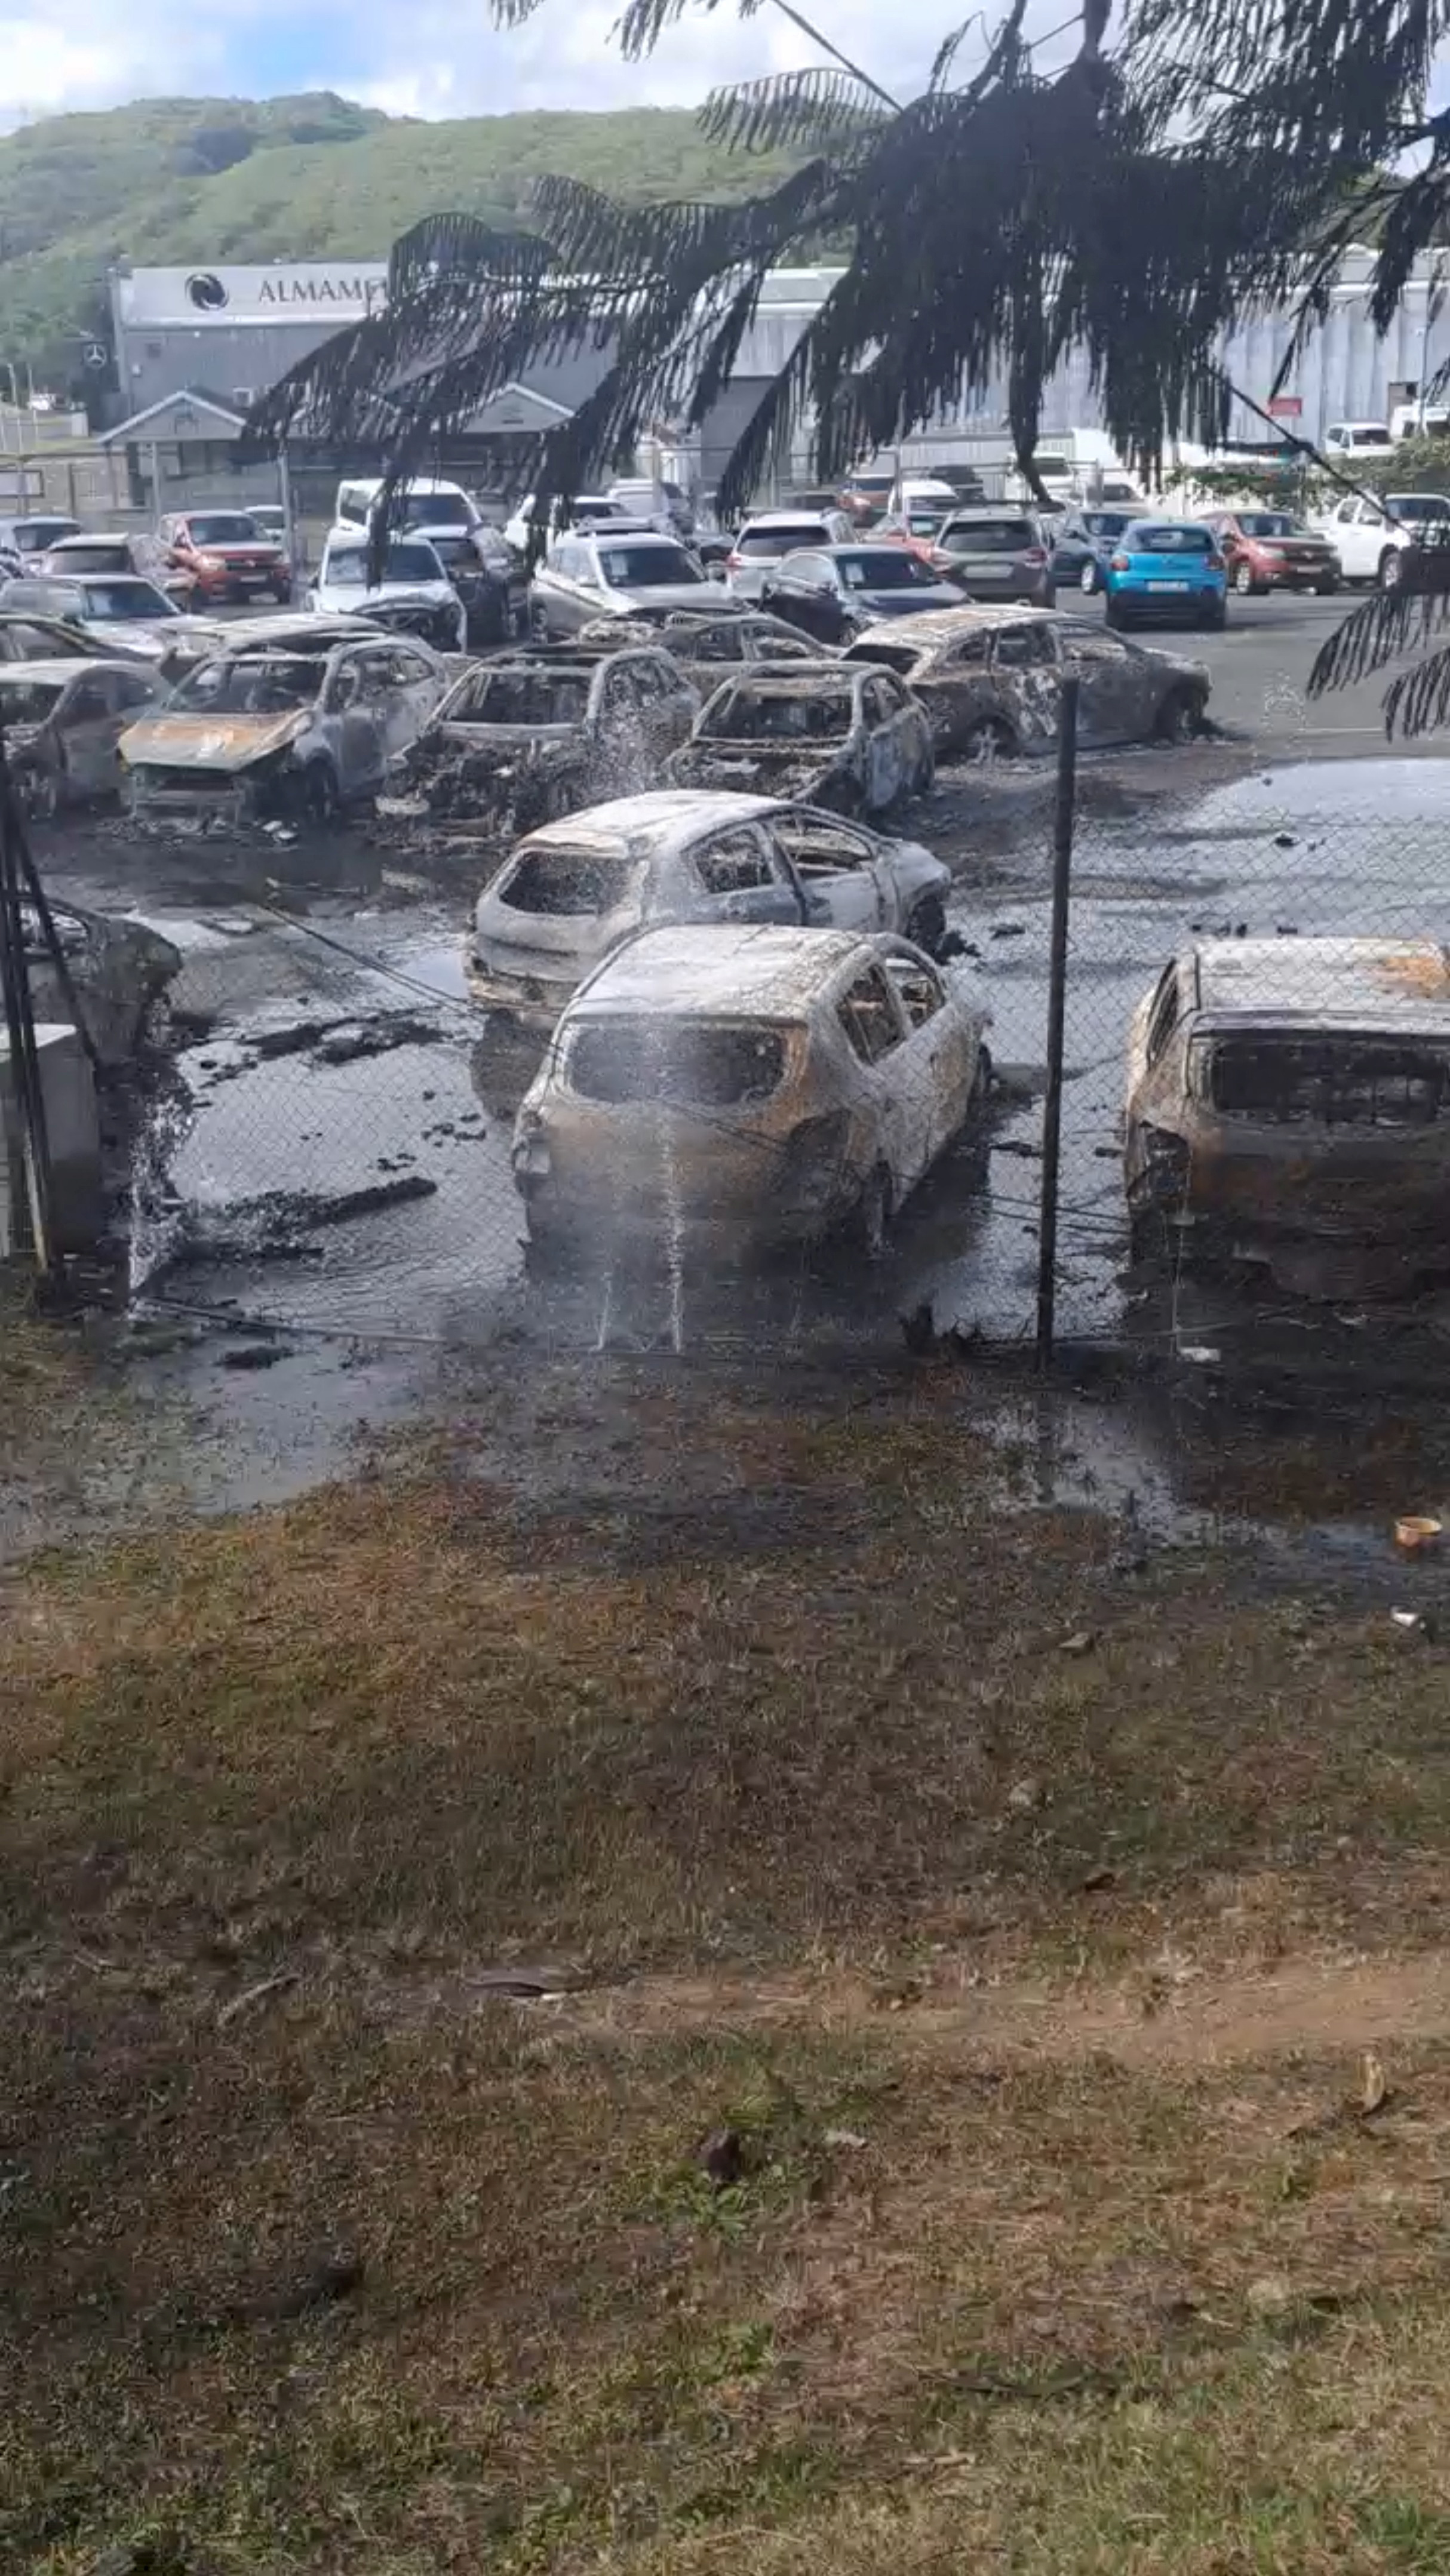 Burnt cars in the aftermath of protests that turned violent, in Noumea